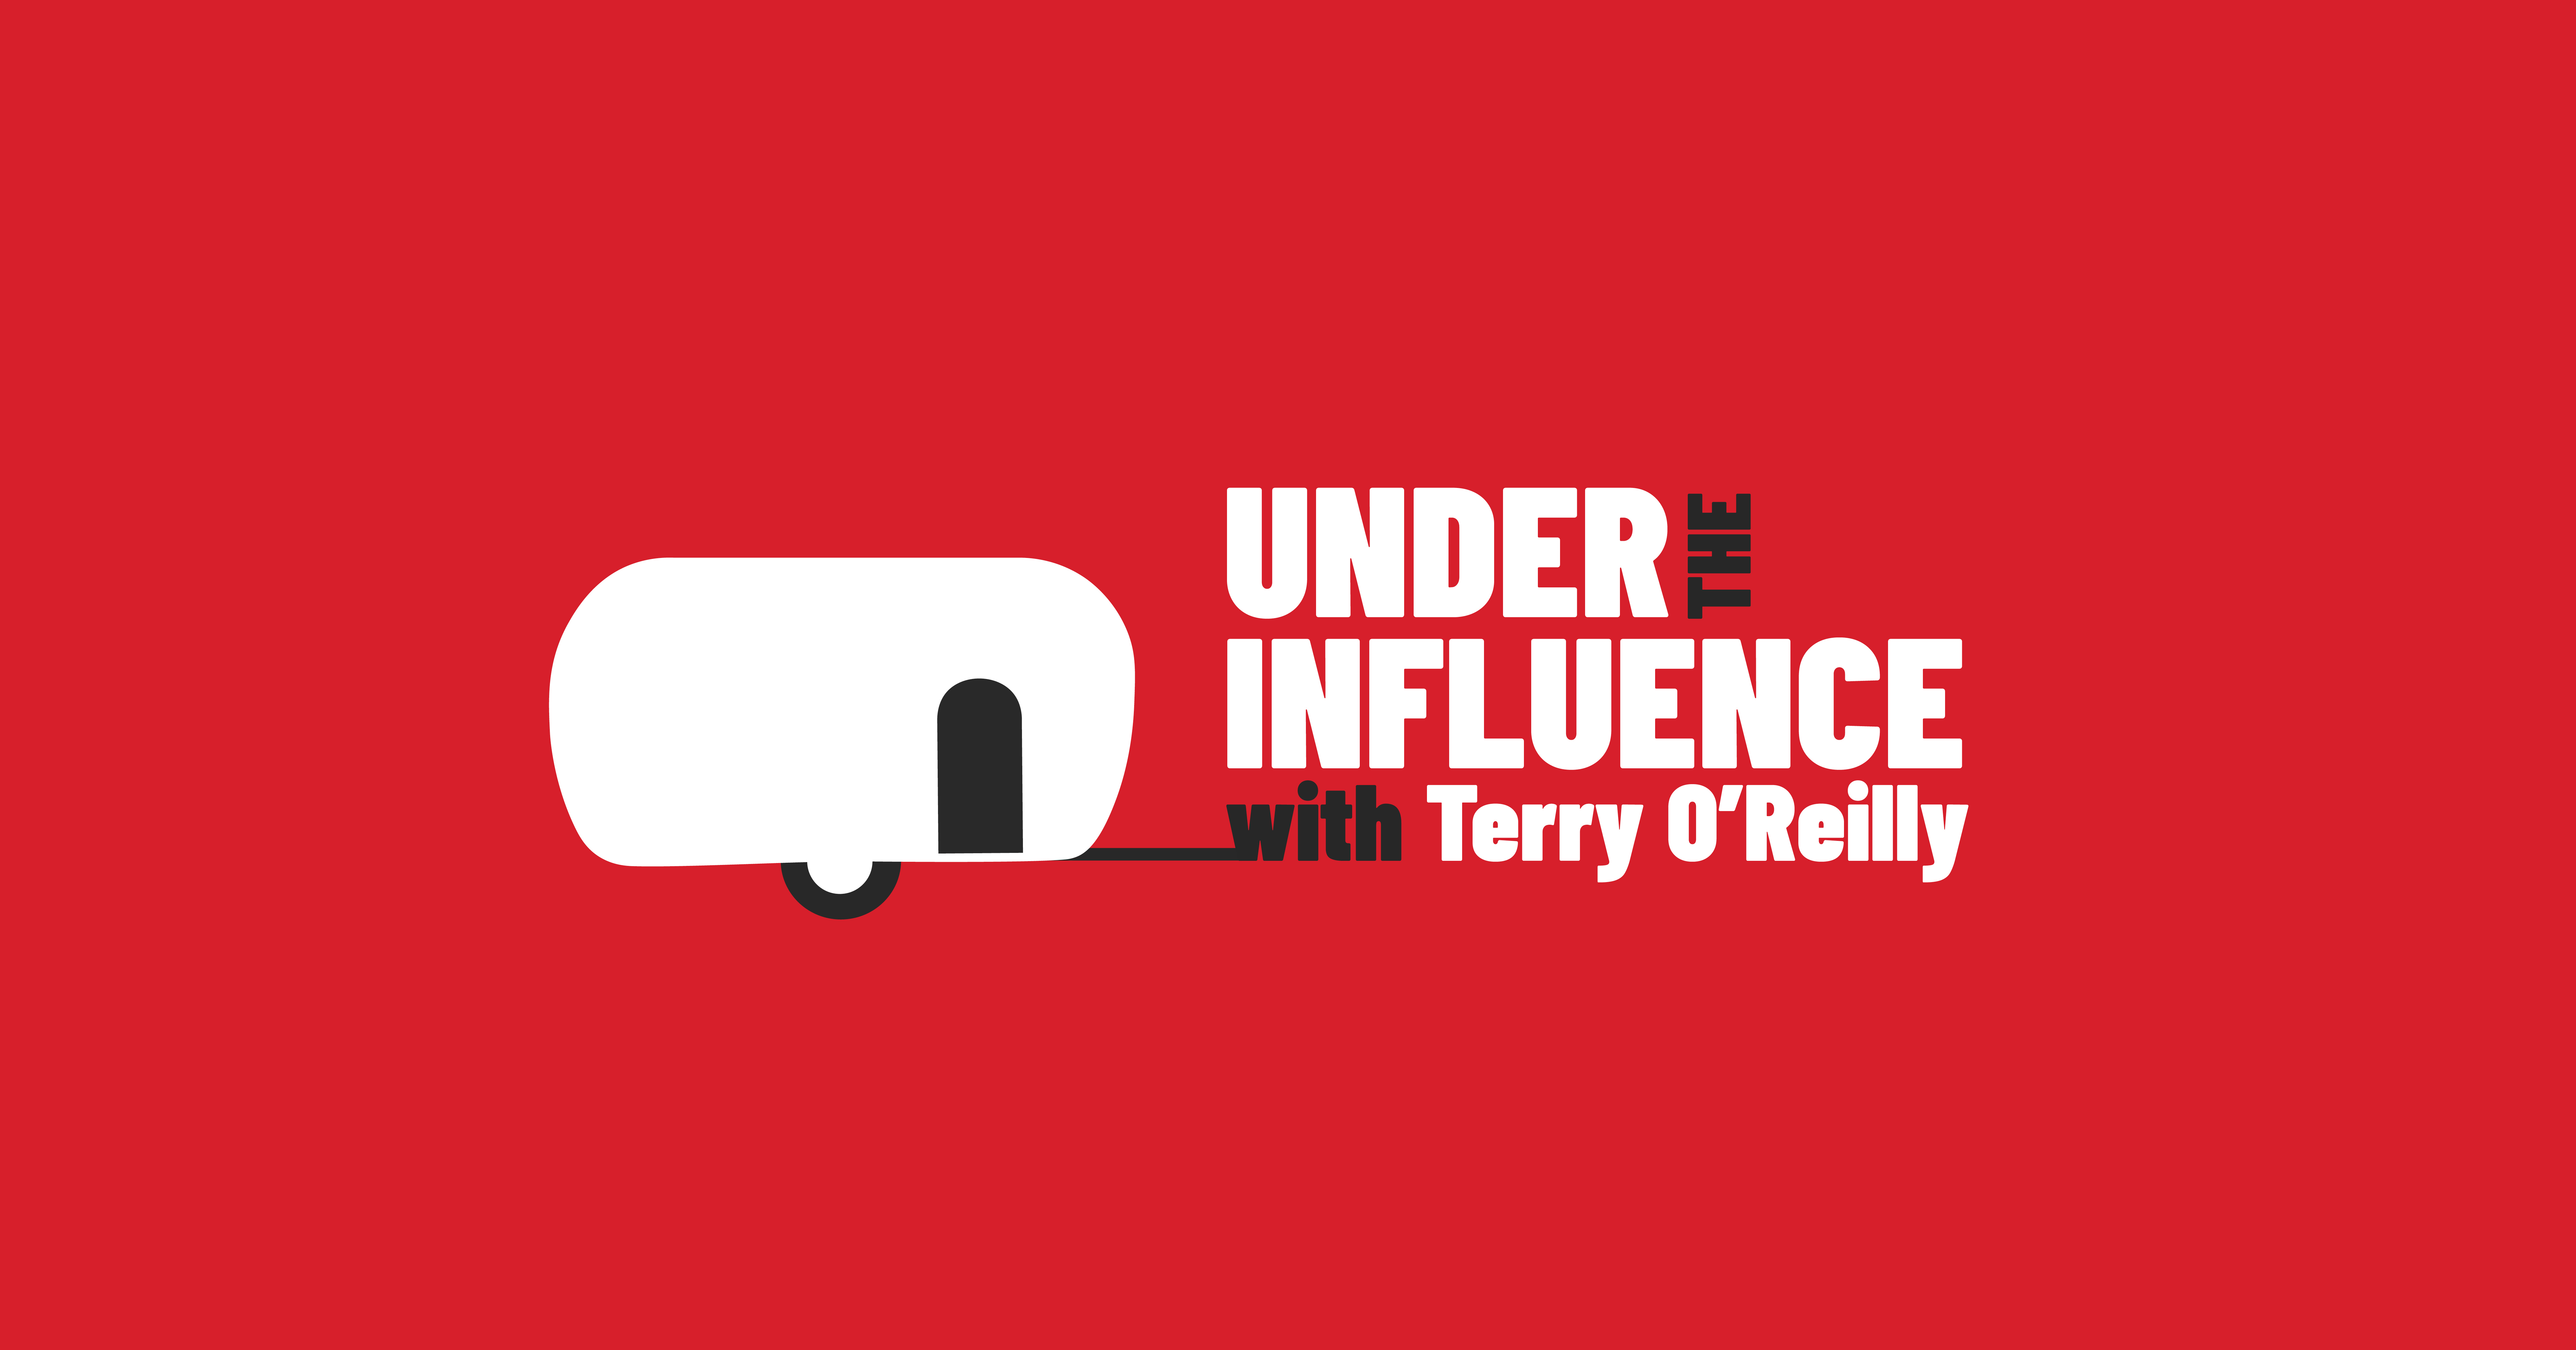 Exploring advertising in podcasts with Terry O'Reilly